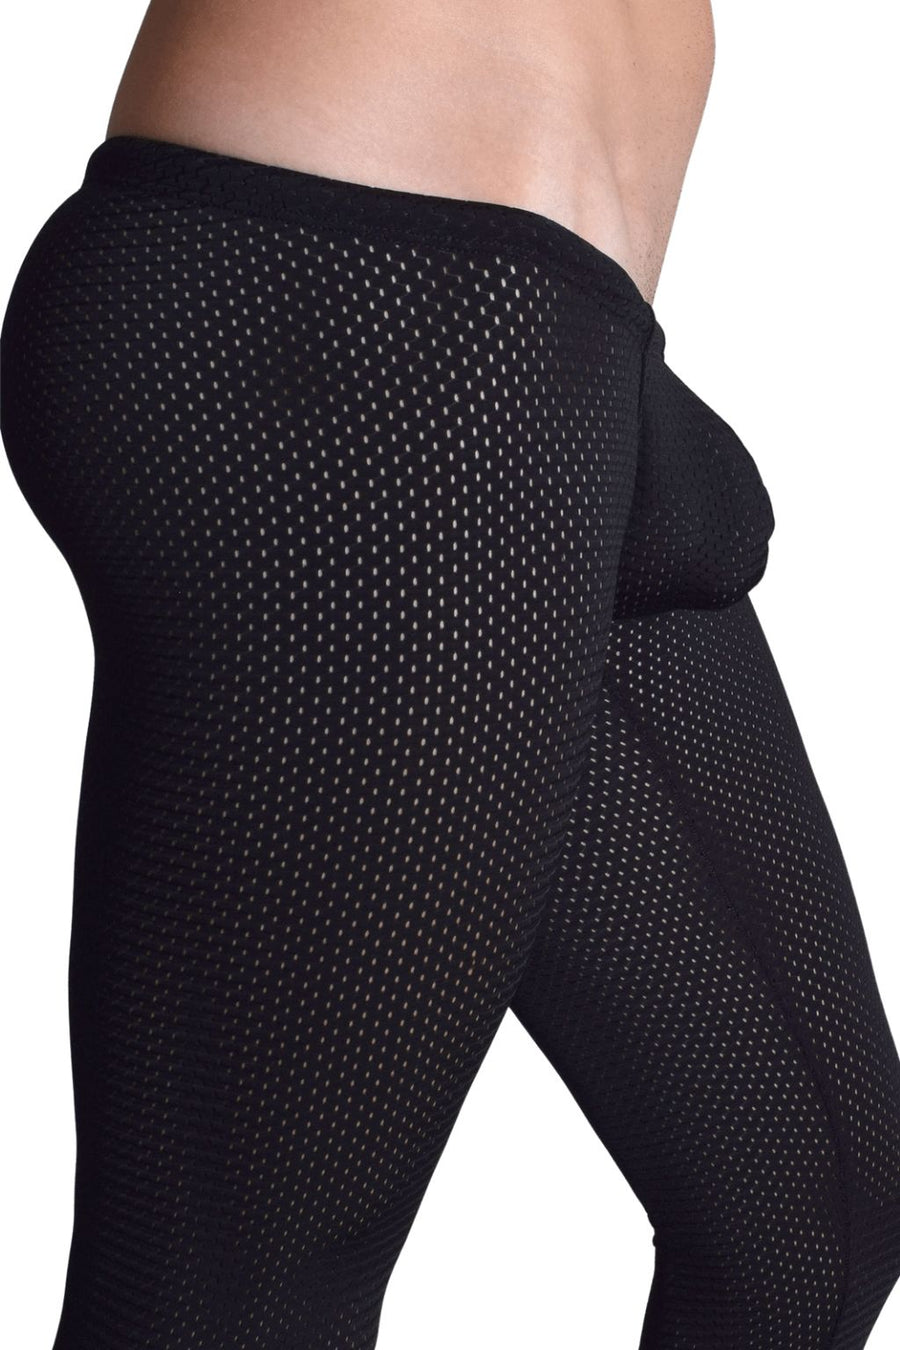 BfM Mens Lowrise Eyelet Tights - Original Pouch